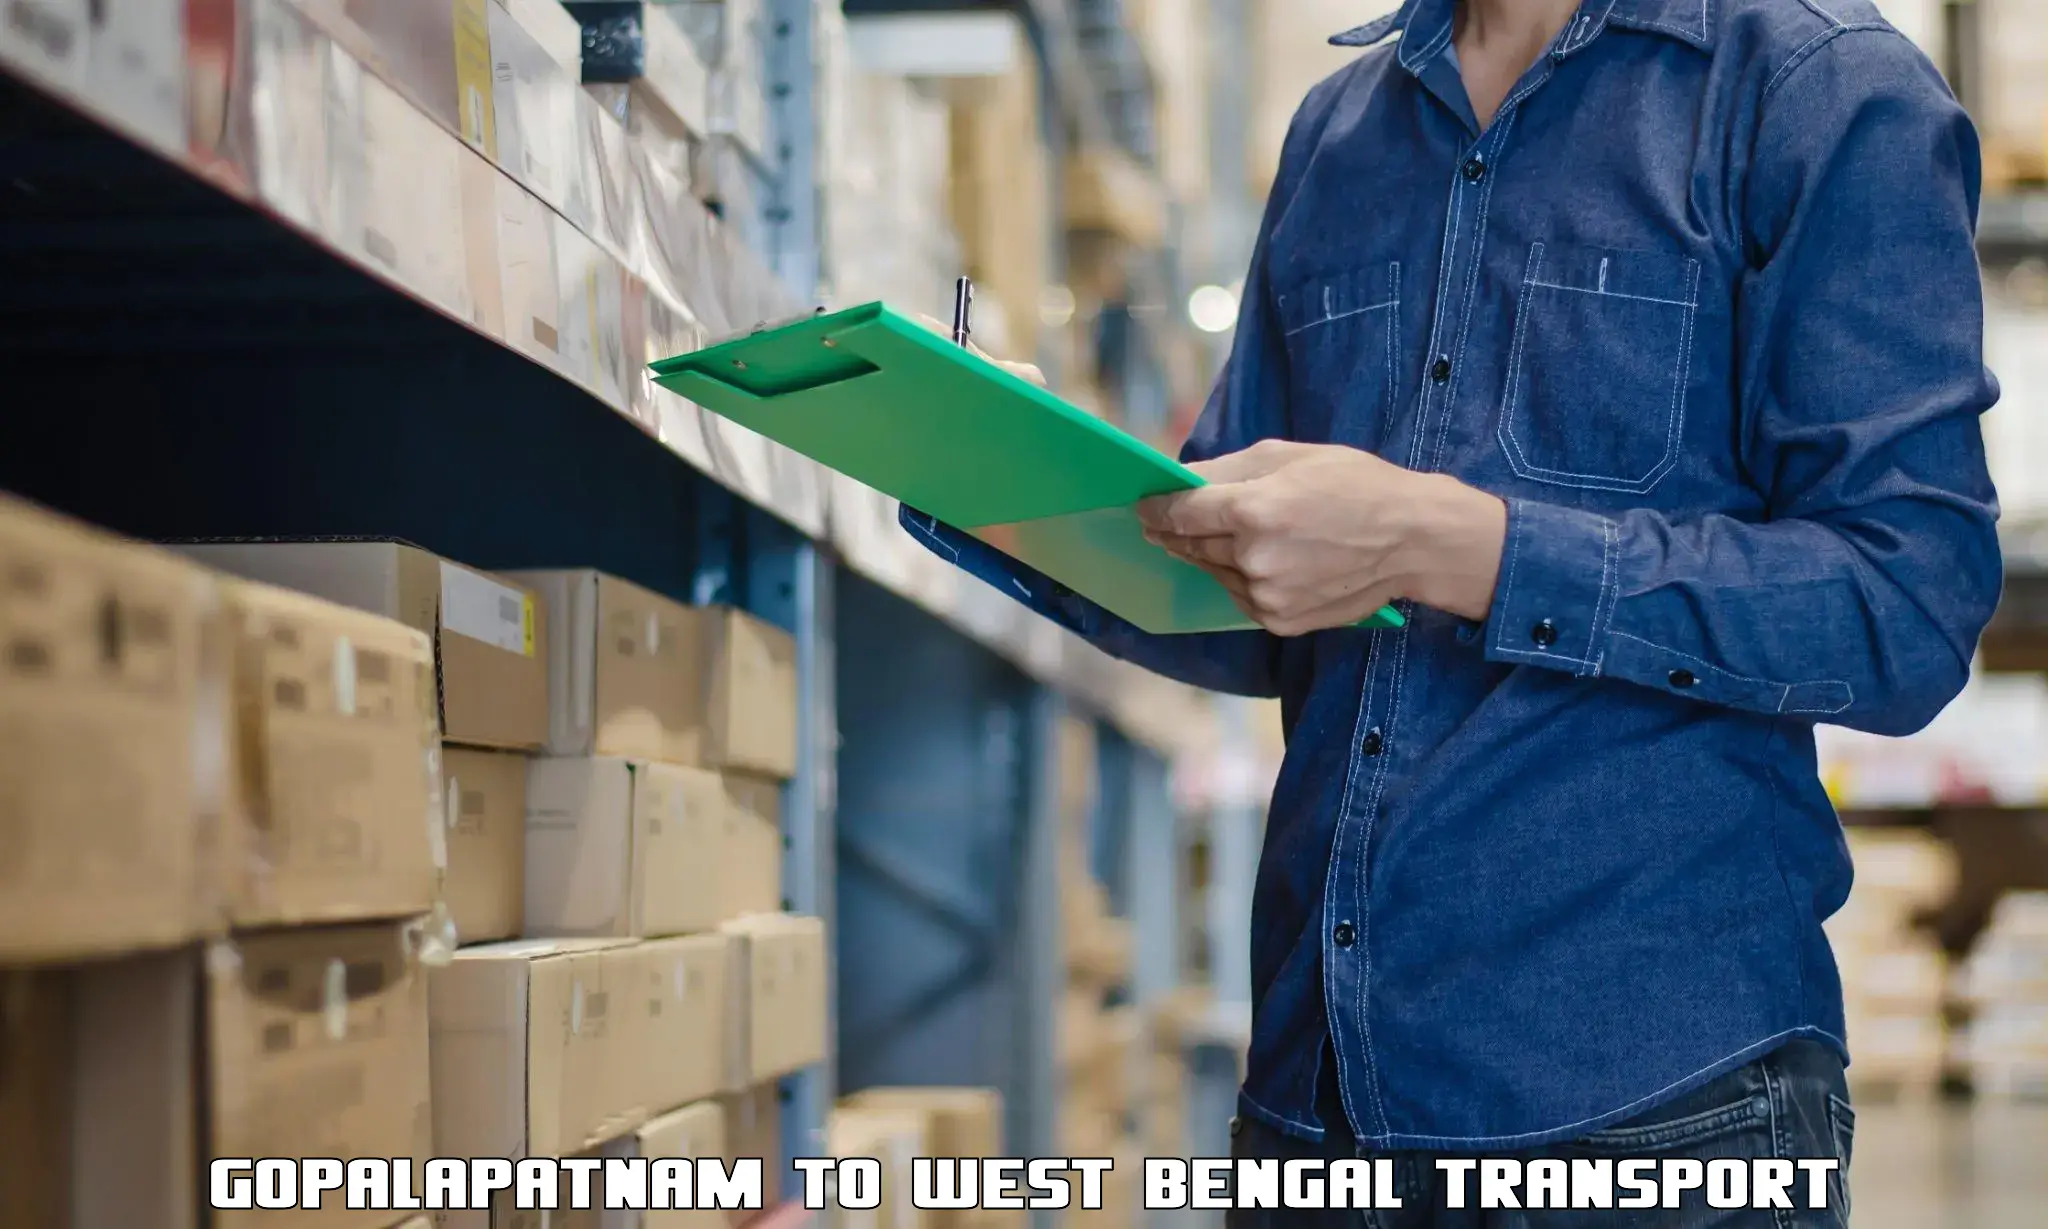 Online transport service Gopalapatnam to West Bengal